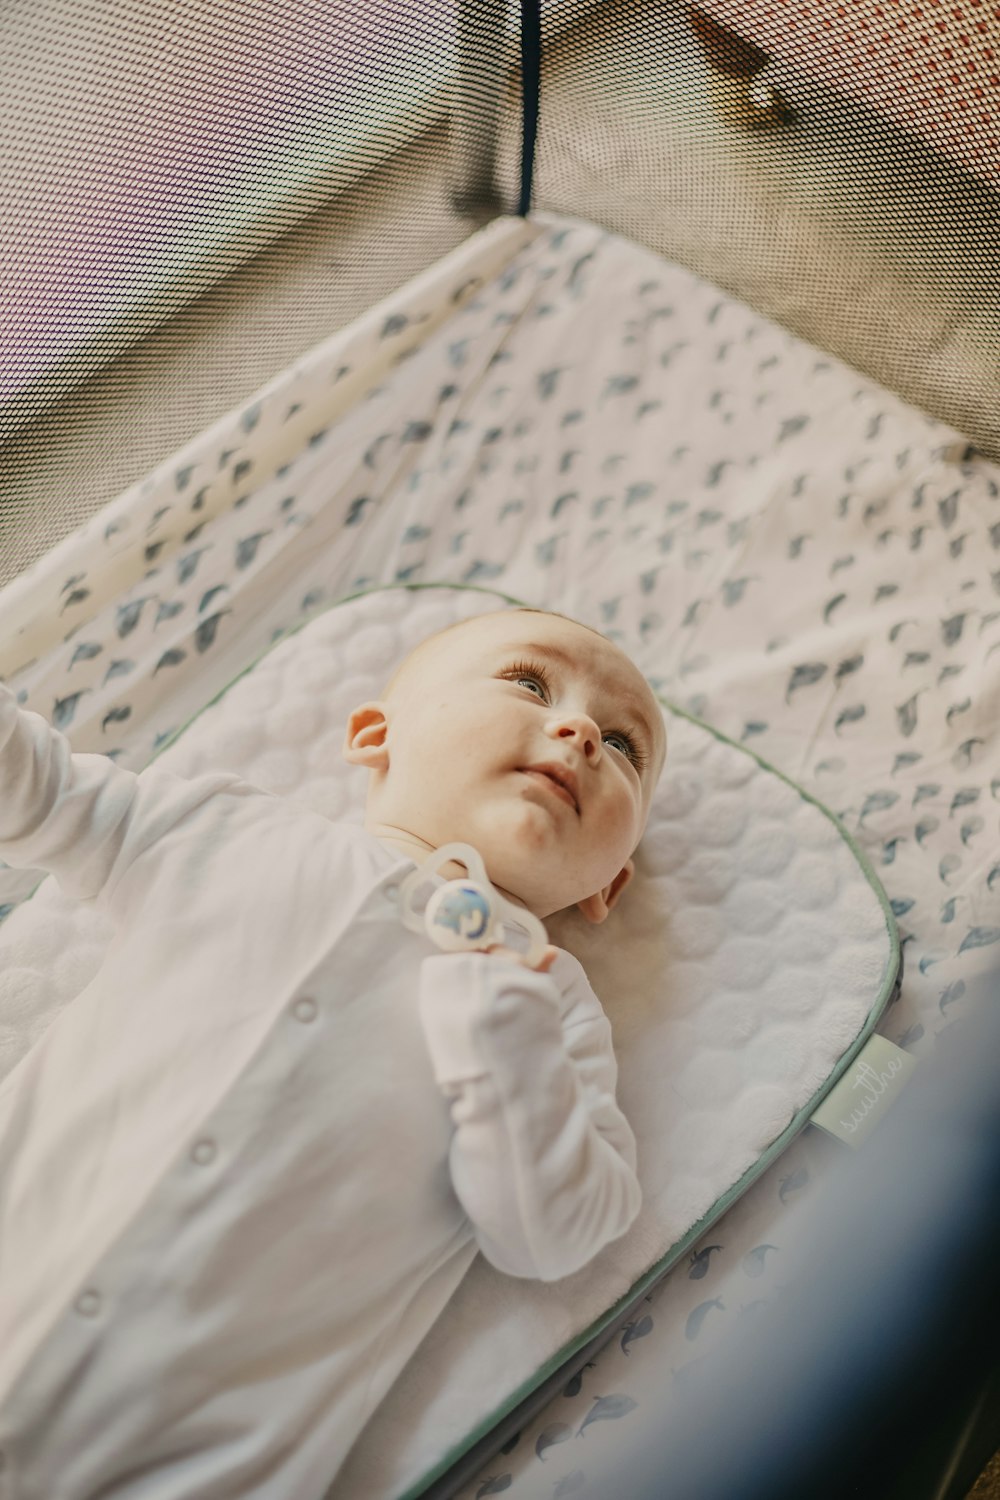 baby in blue button up shirt lying on white and green bed